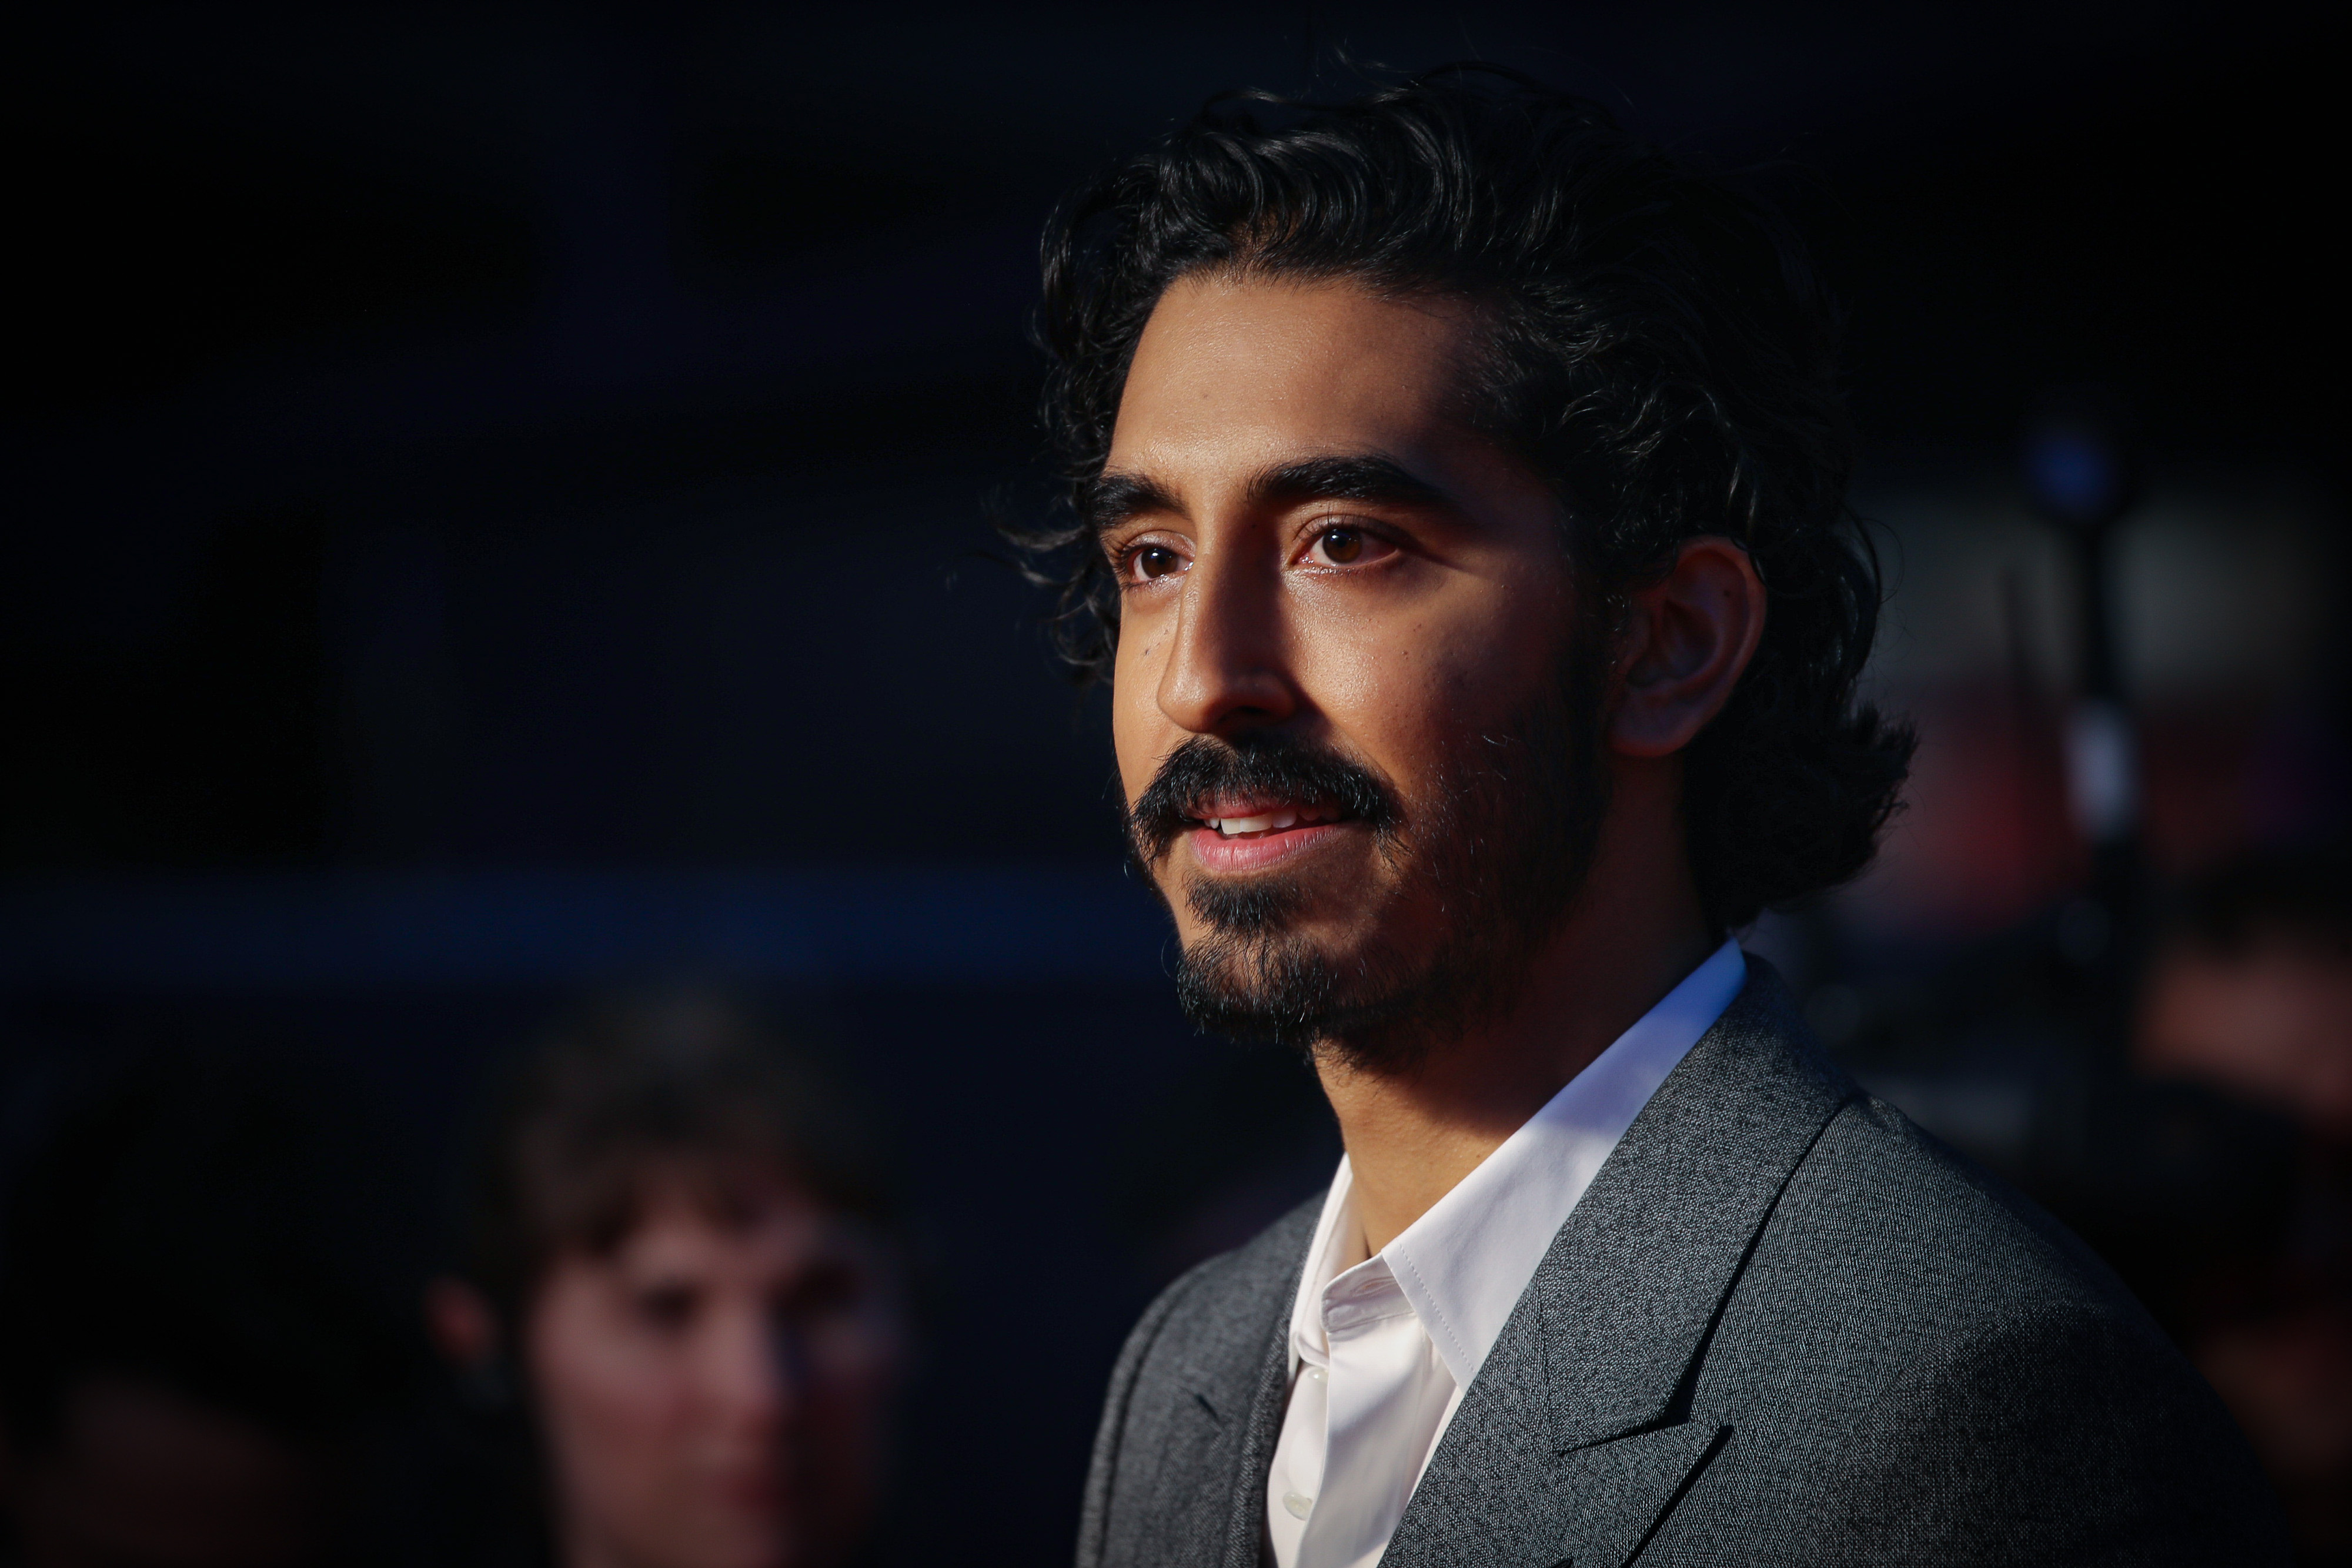 Dev Patel was cast in The Green Knight because he was a likable hero